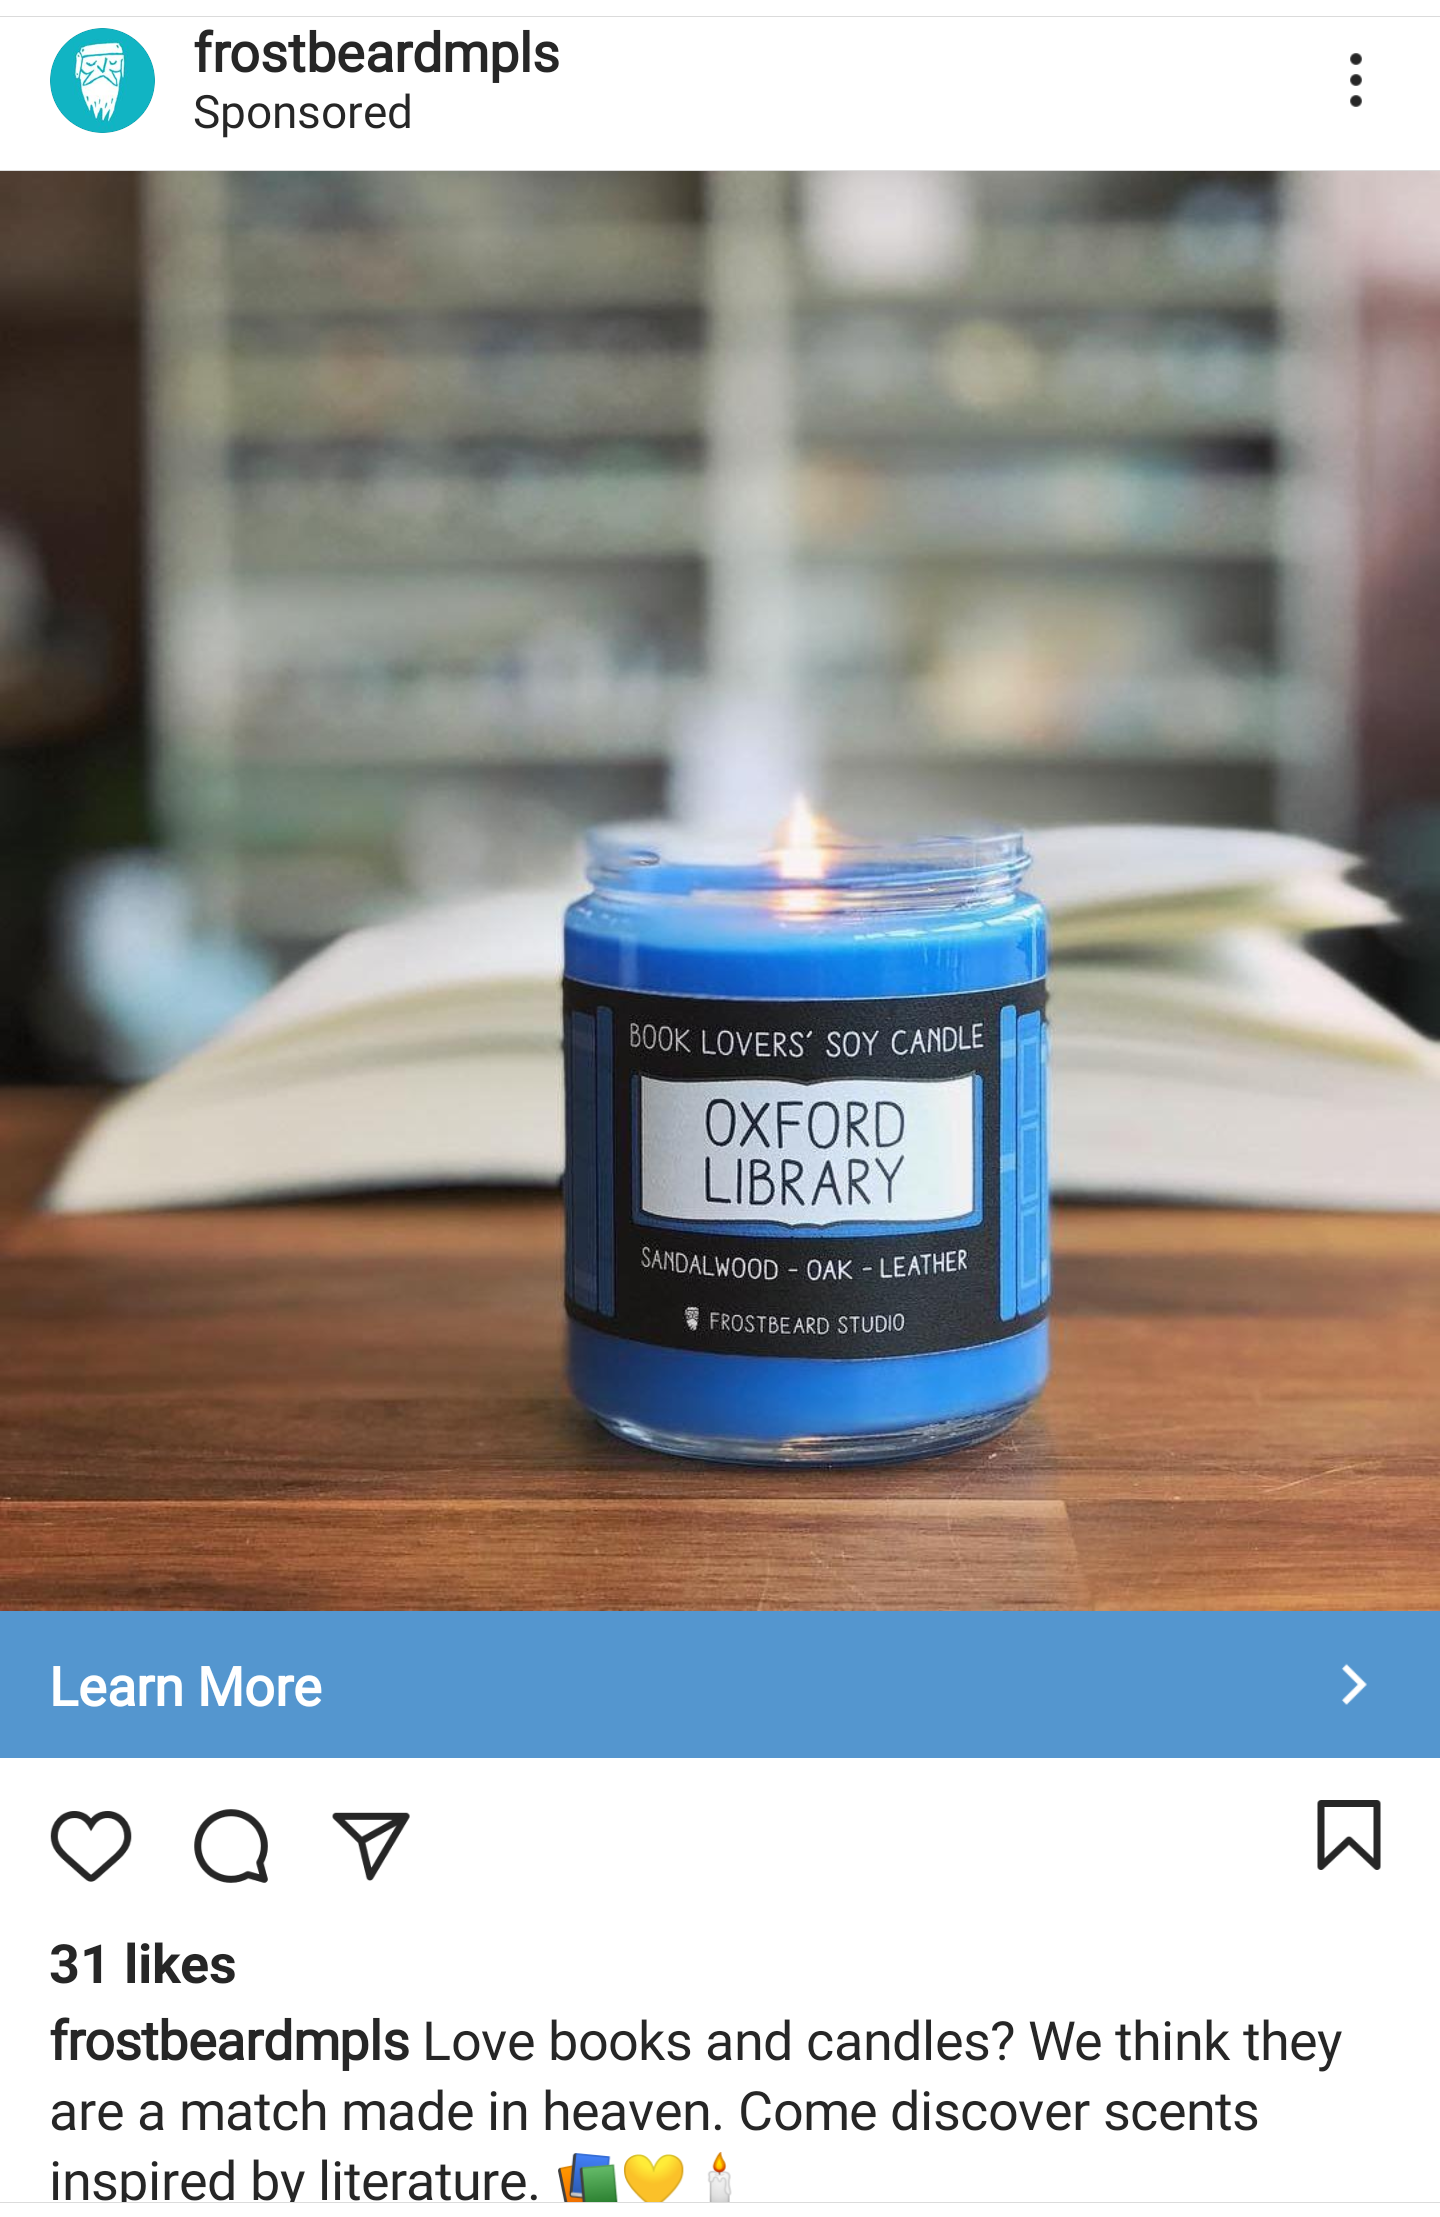 oxford library candle